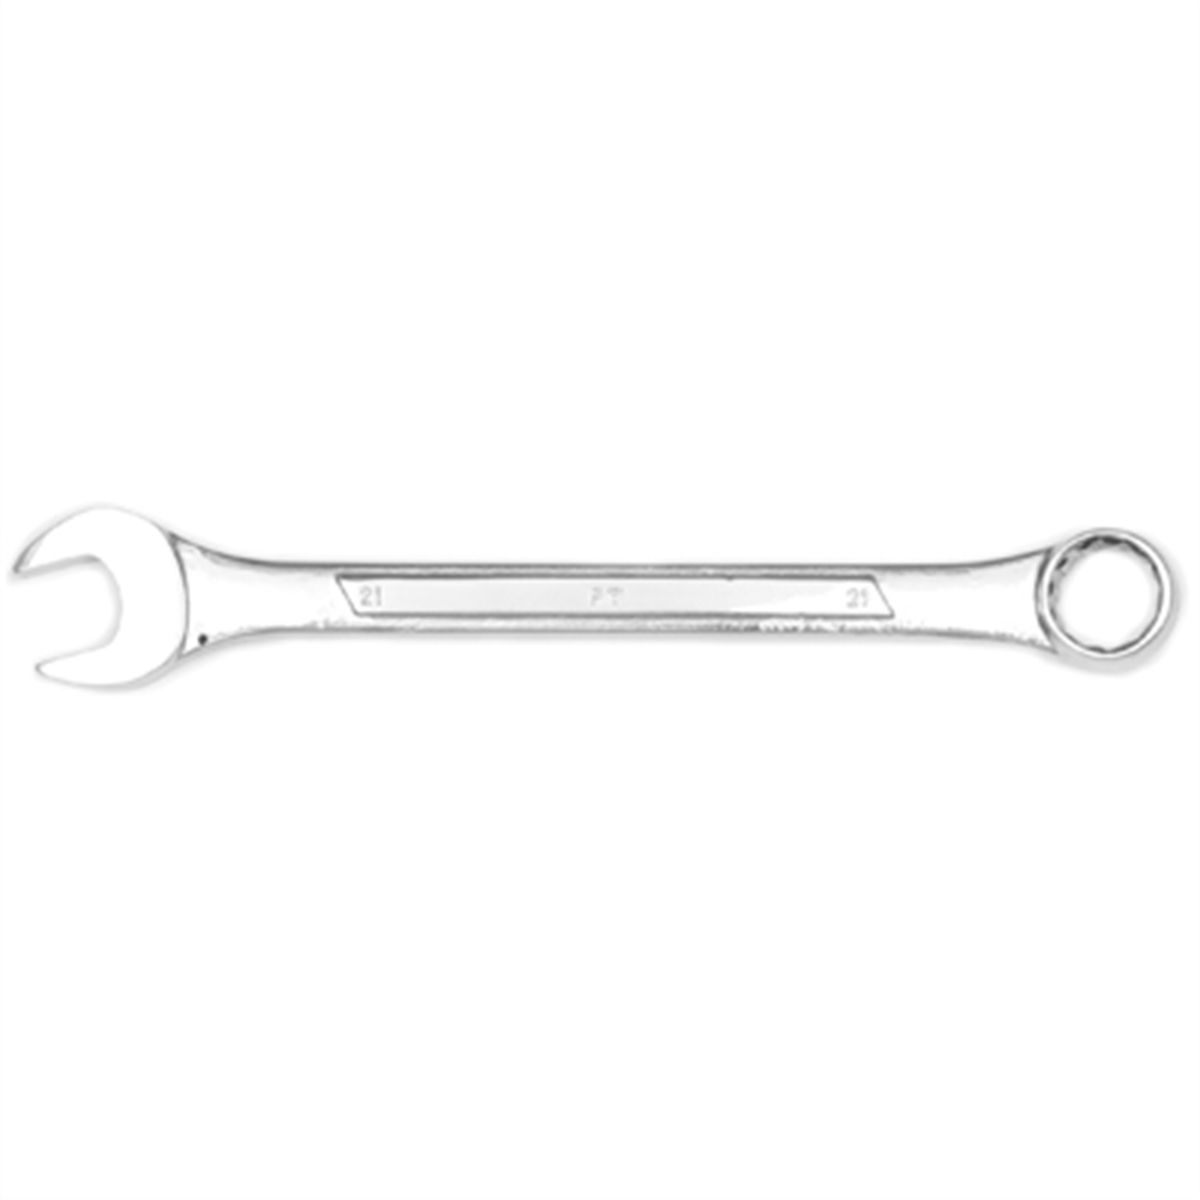 21mm Metric Comb Wrench